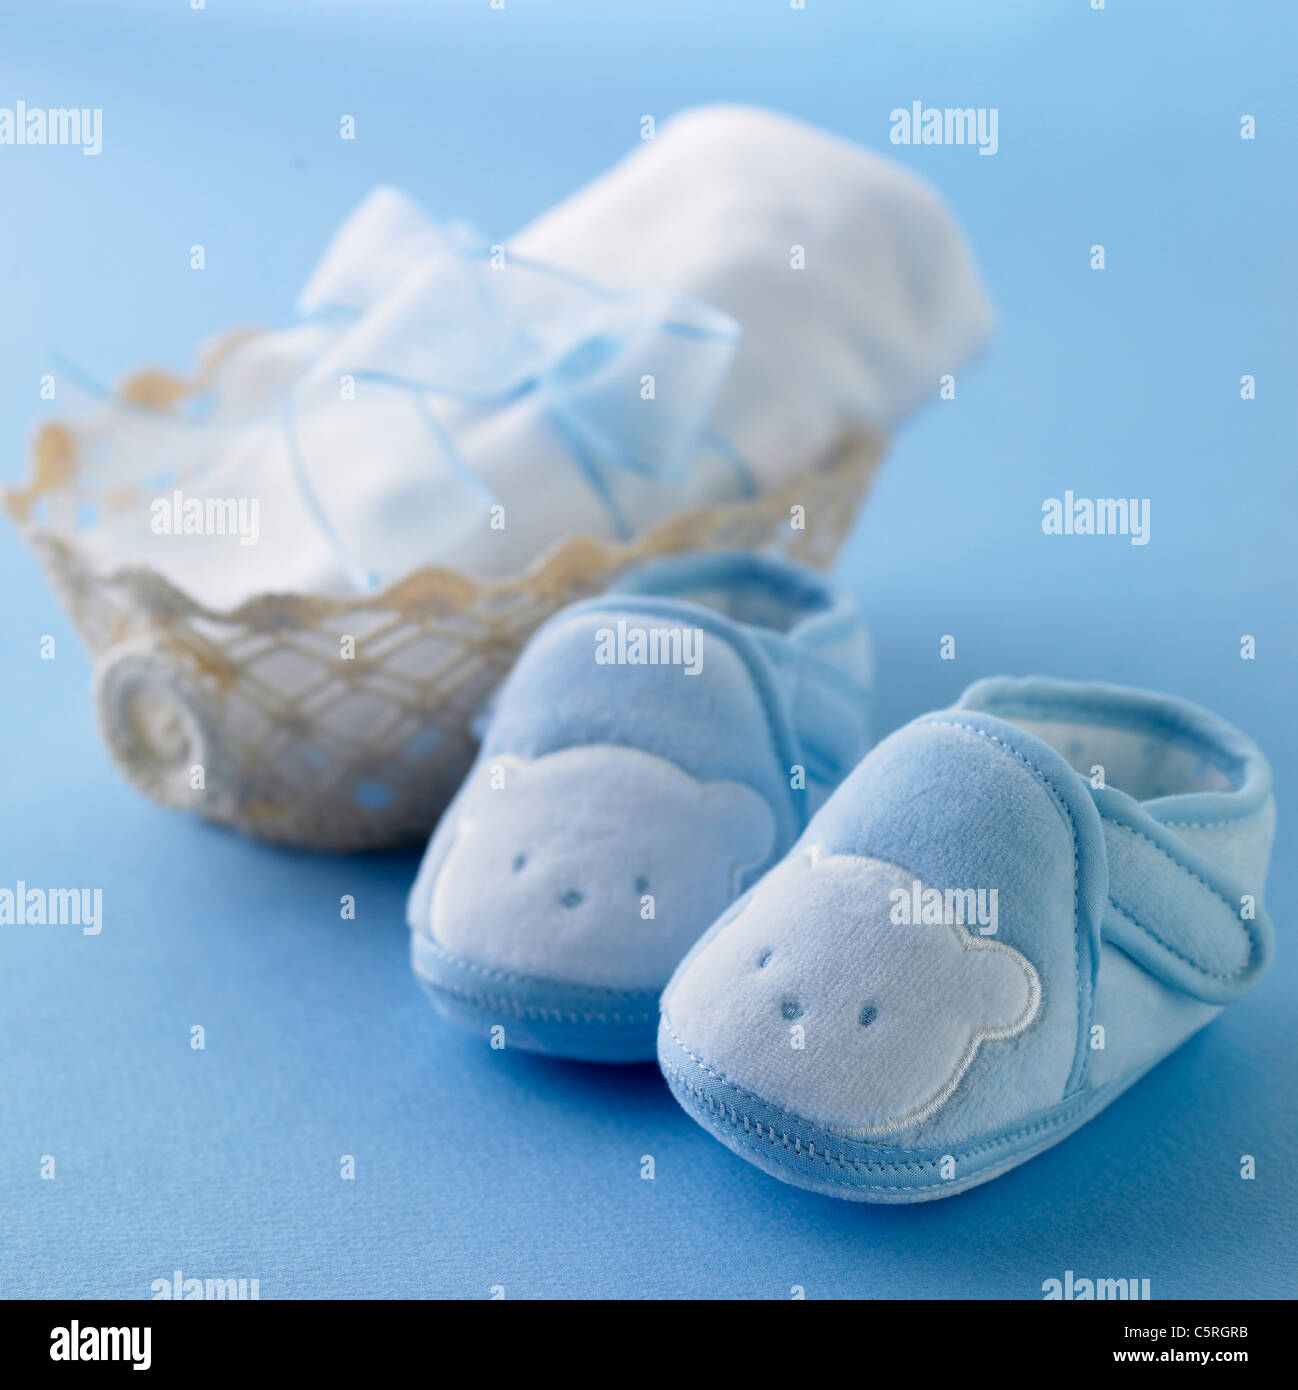 Baby's shoes and a basket Stock Photo